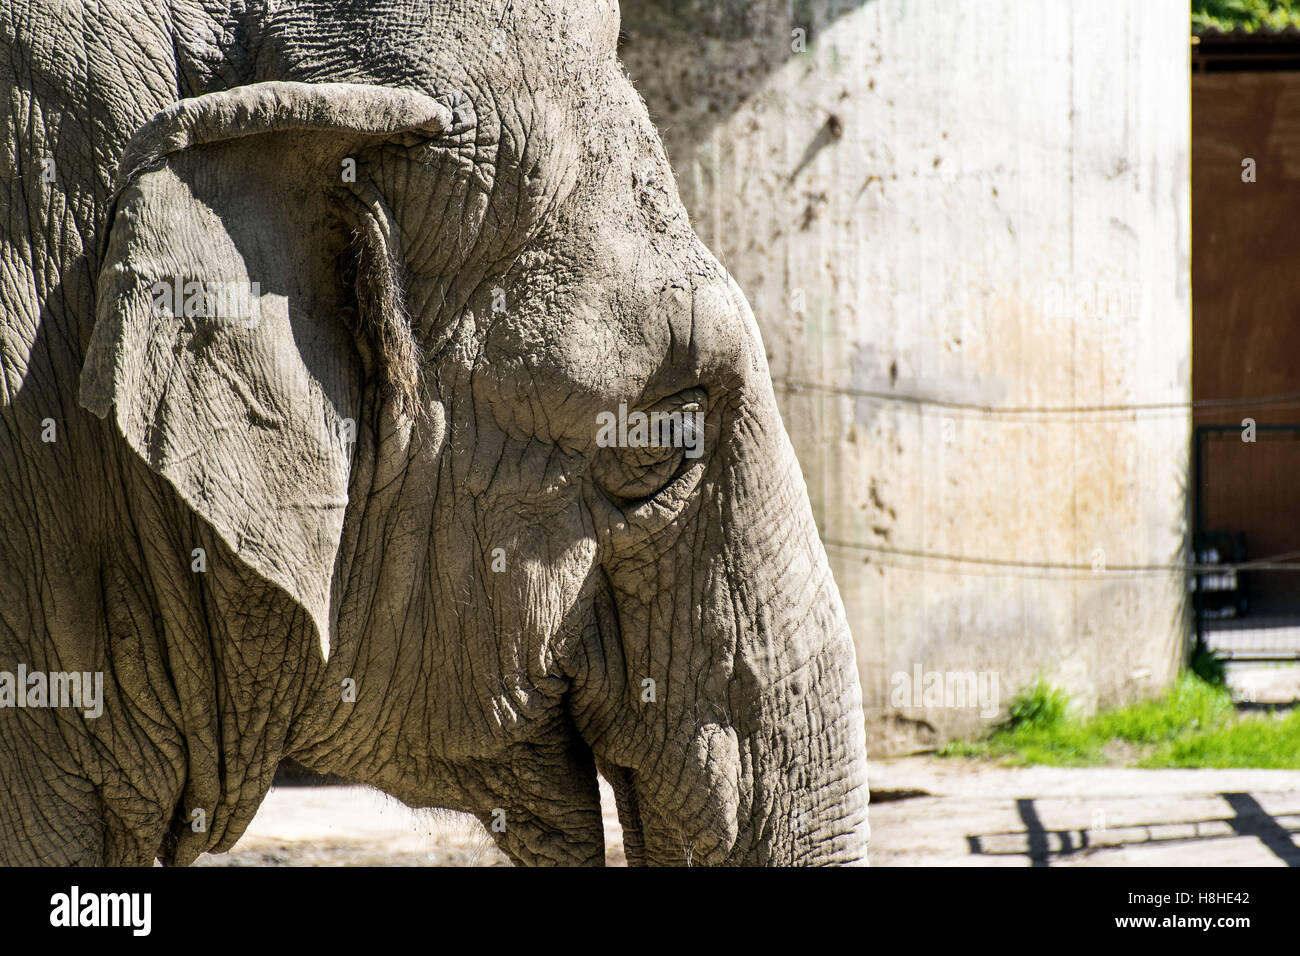 Close up of an African elephant in the zoo of Pistoia, Italy Stock Photo